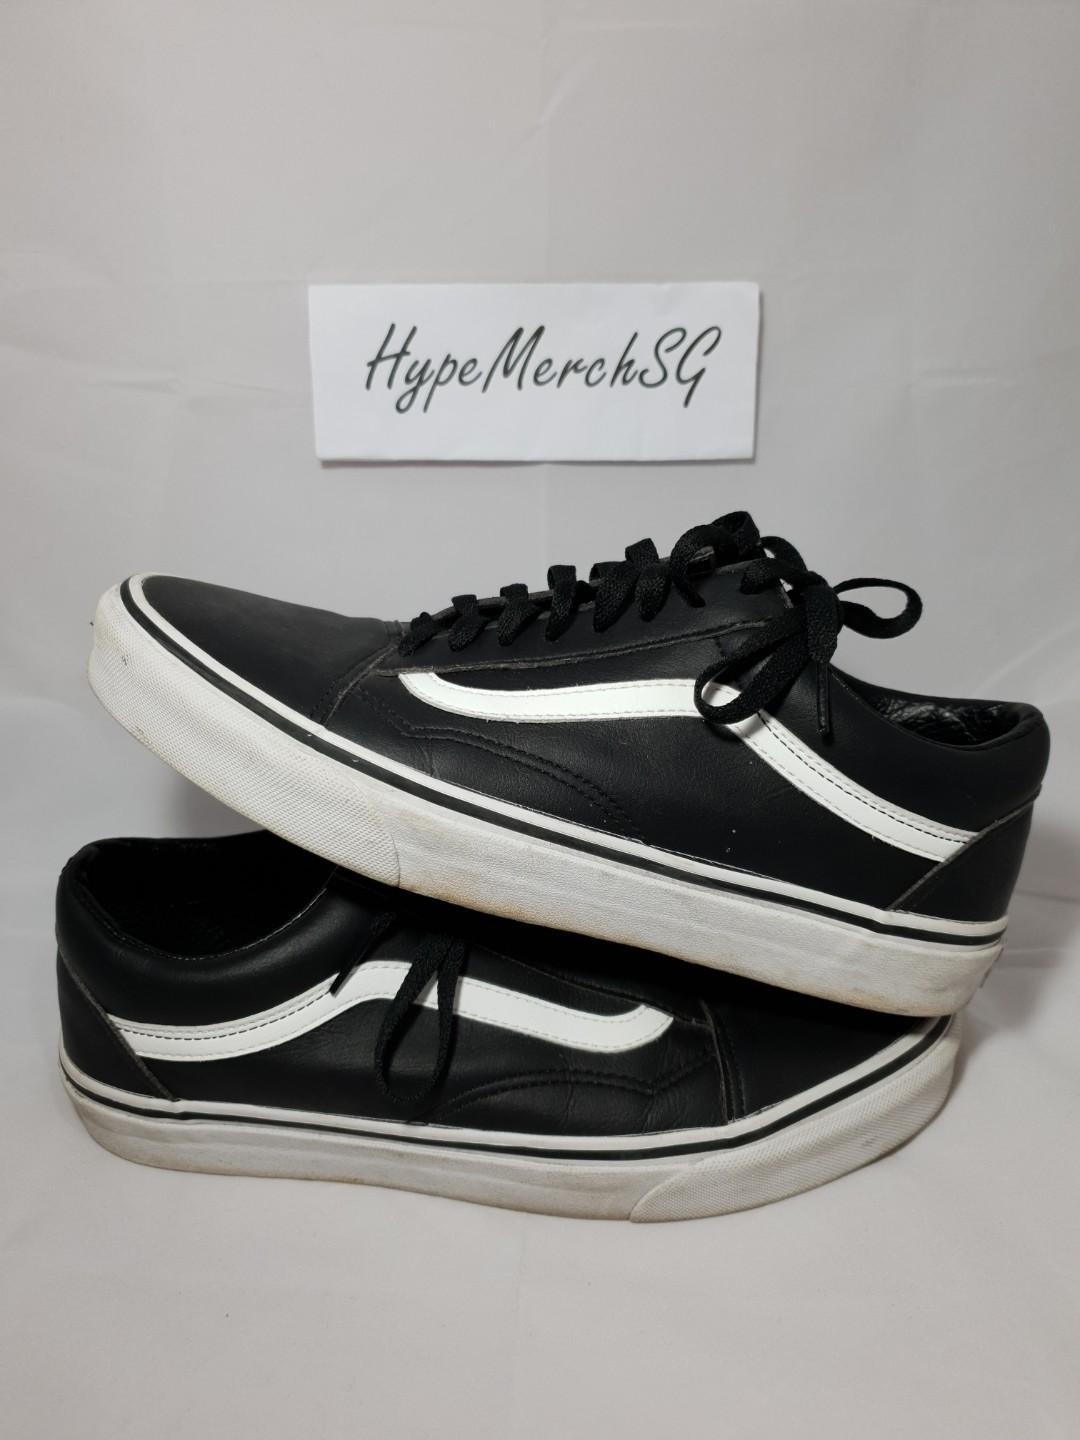 low cut vans black and white